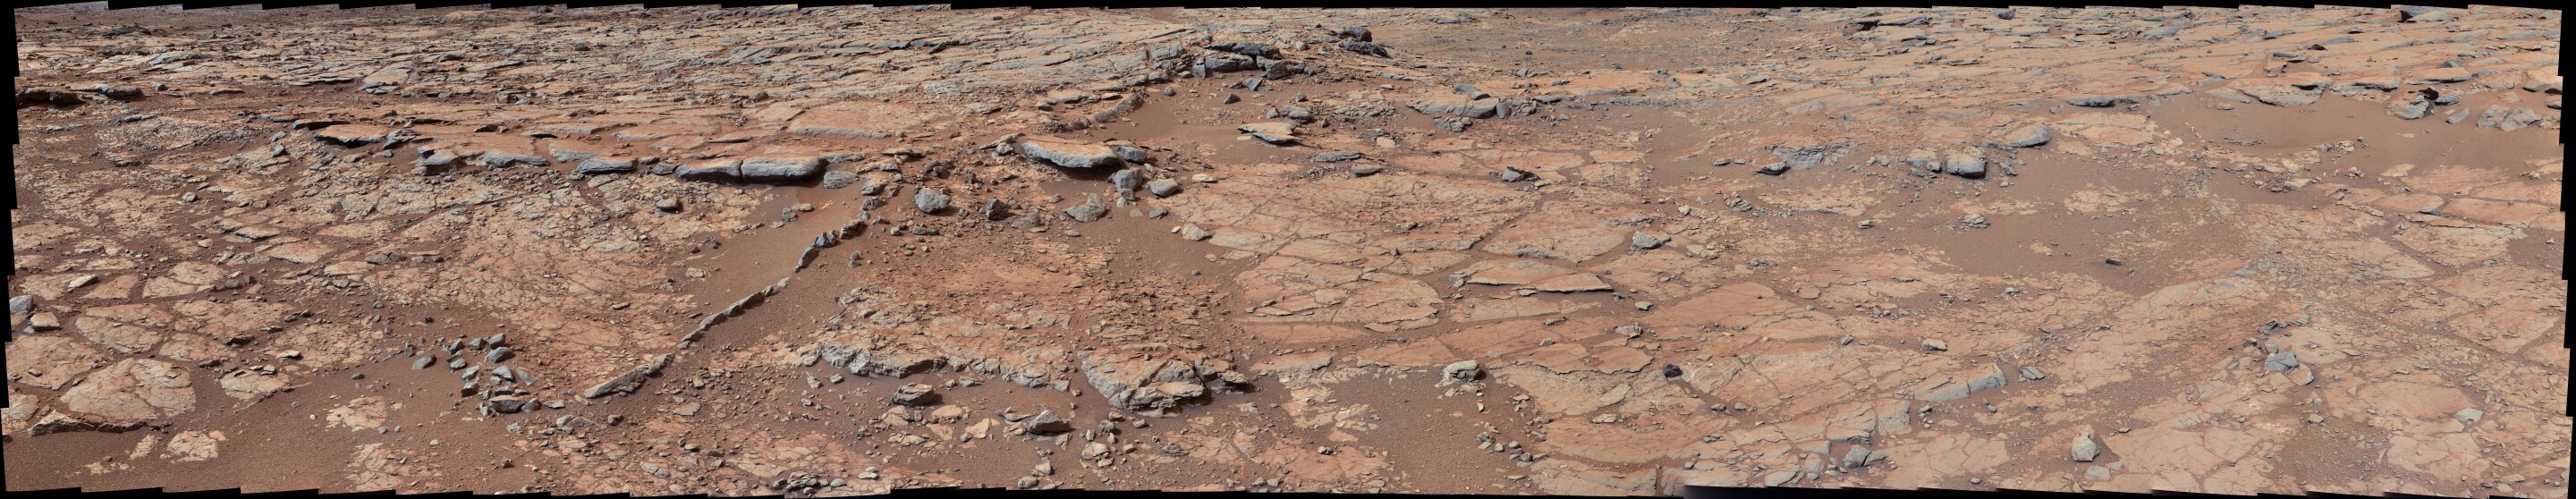 Curiosity rover takes inventory of key life ingredient on Mars